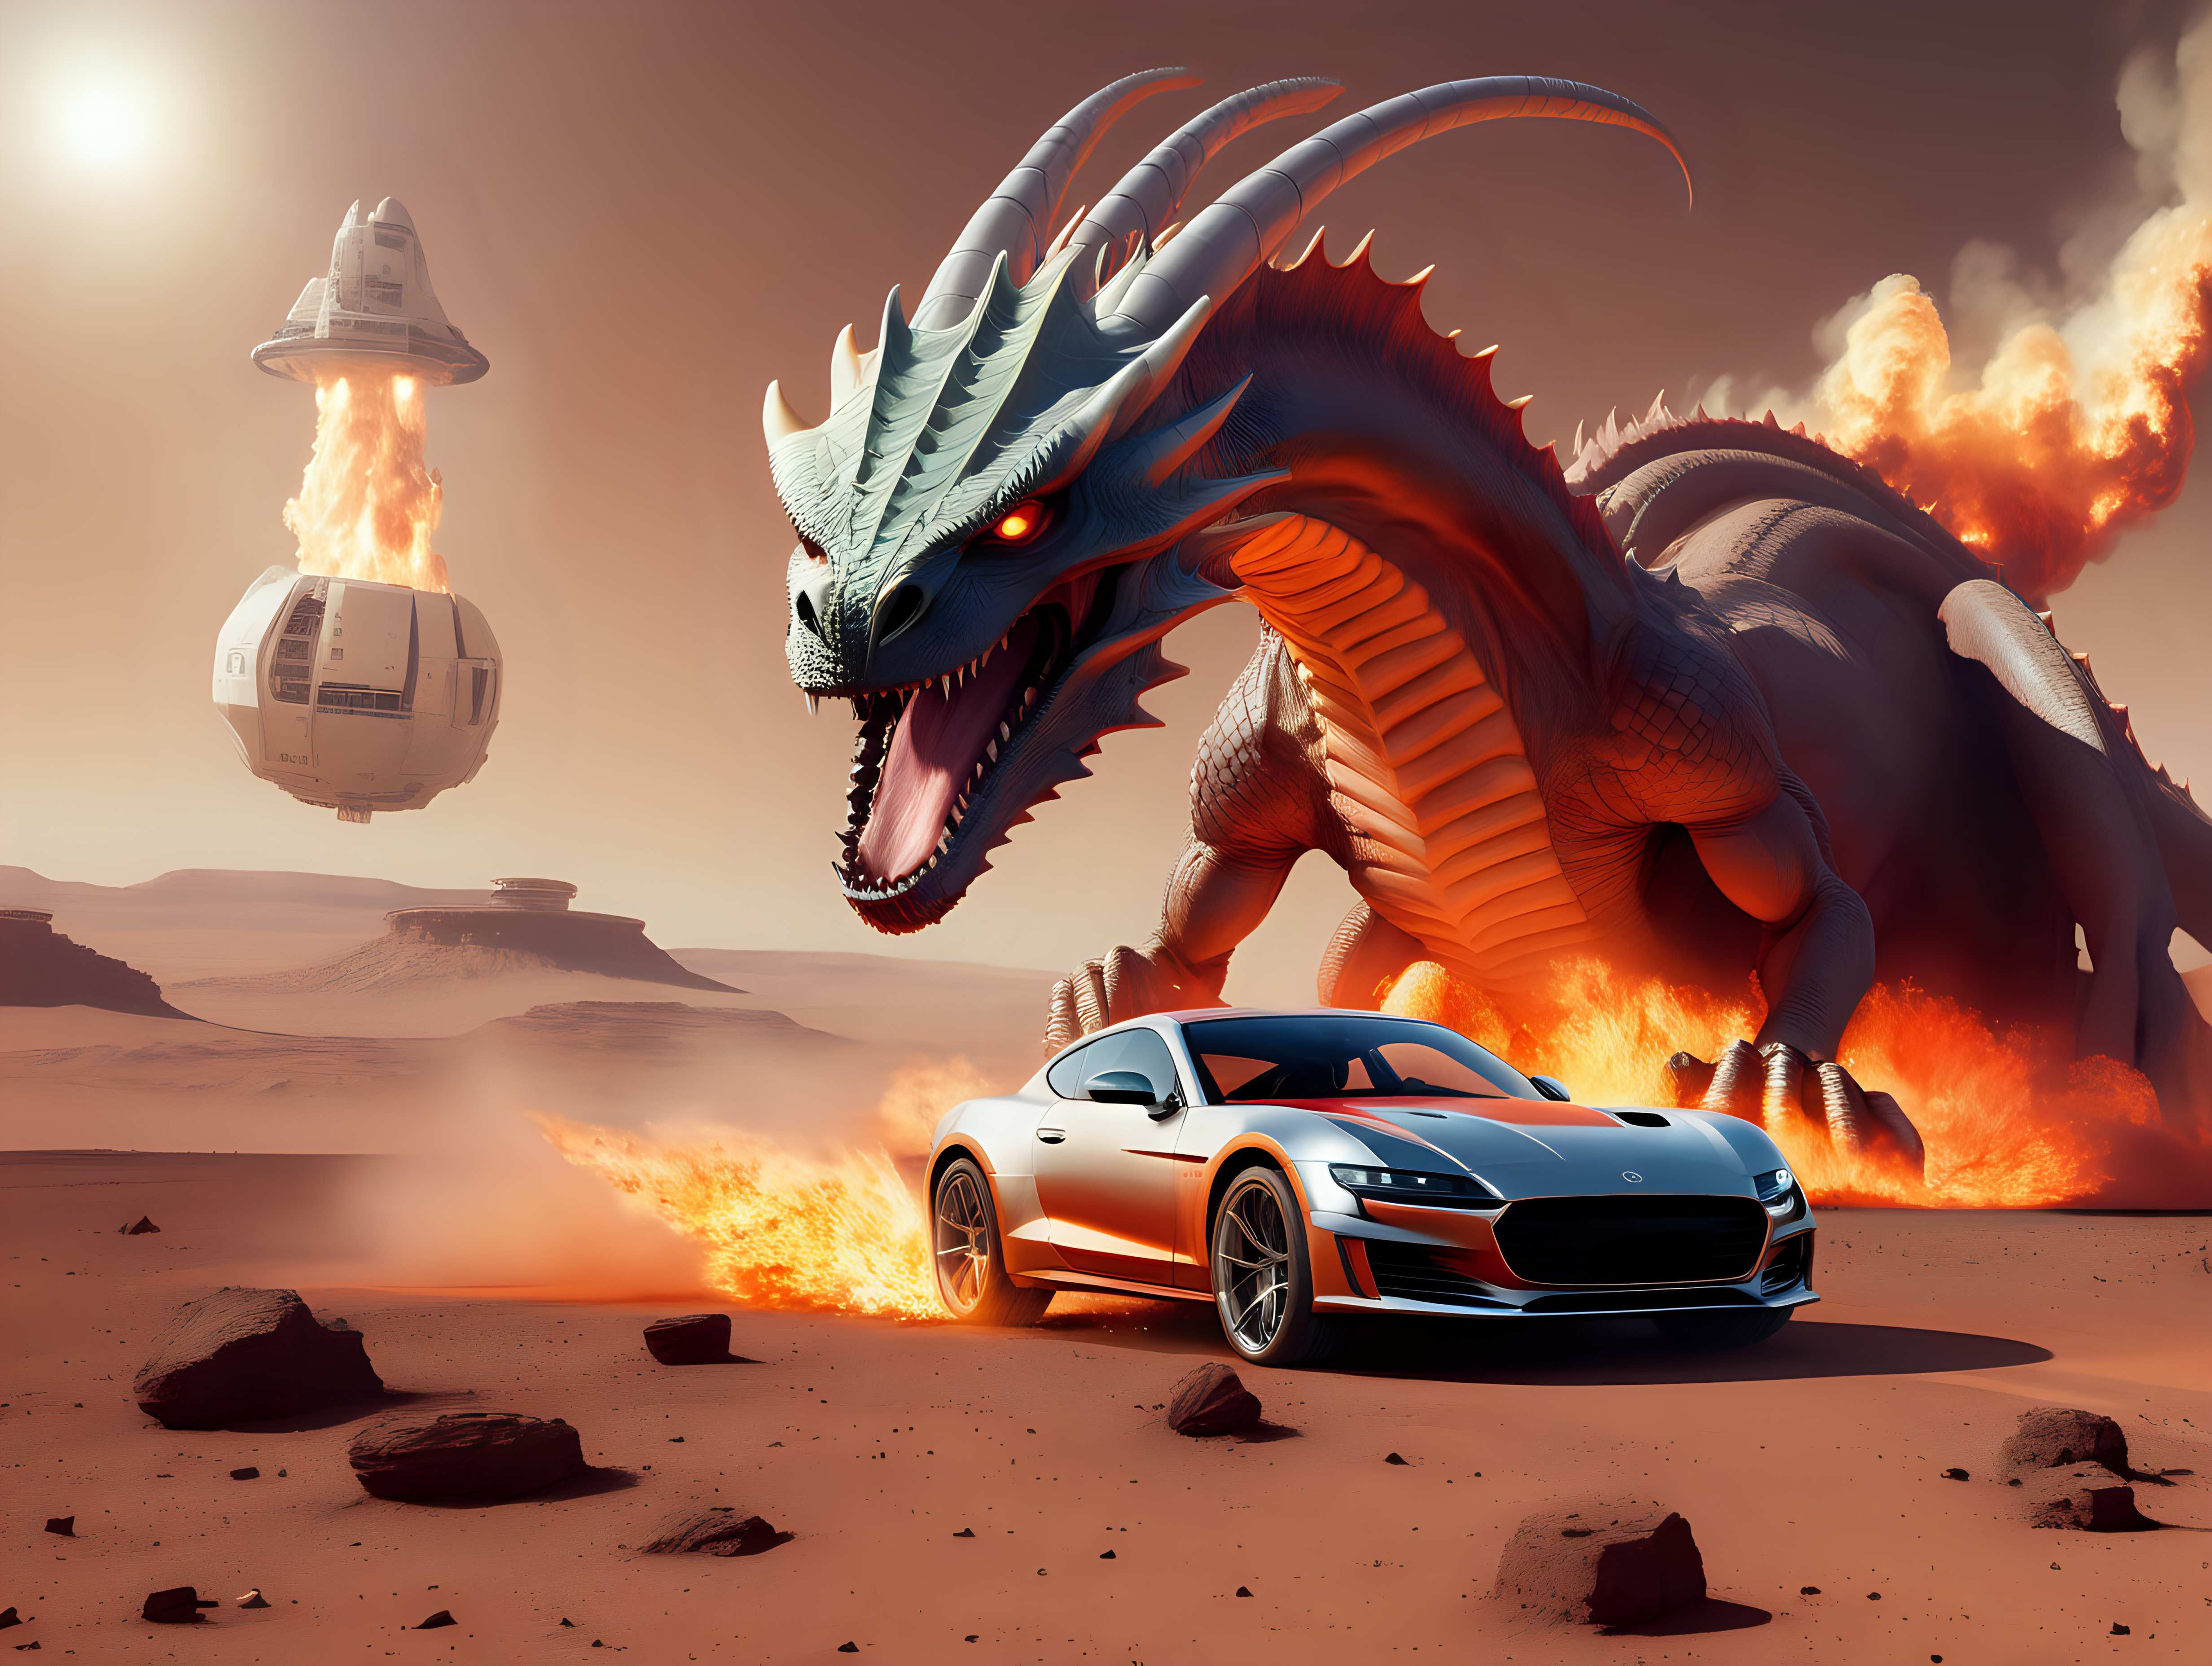 European sports car driving on Mars chased by a fire breathing dragon